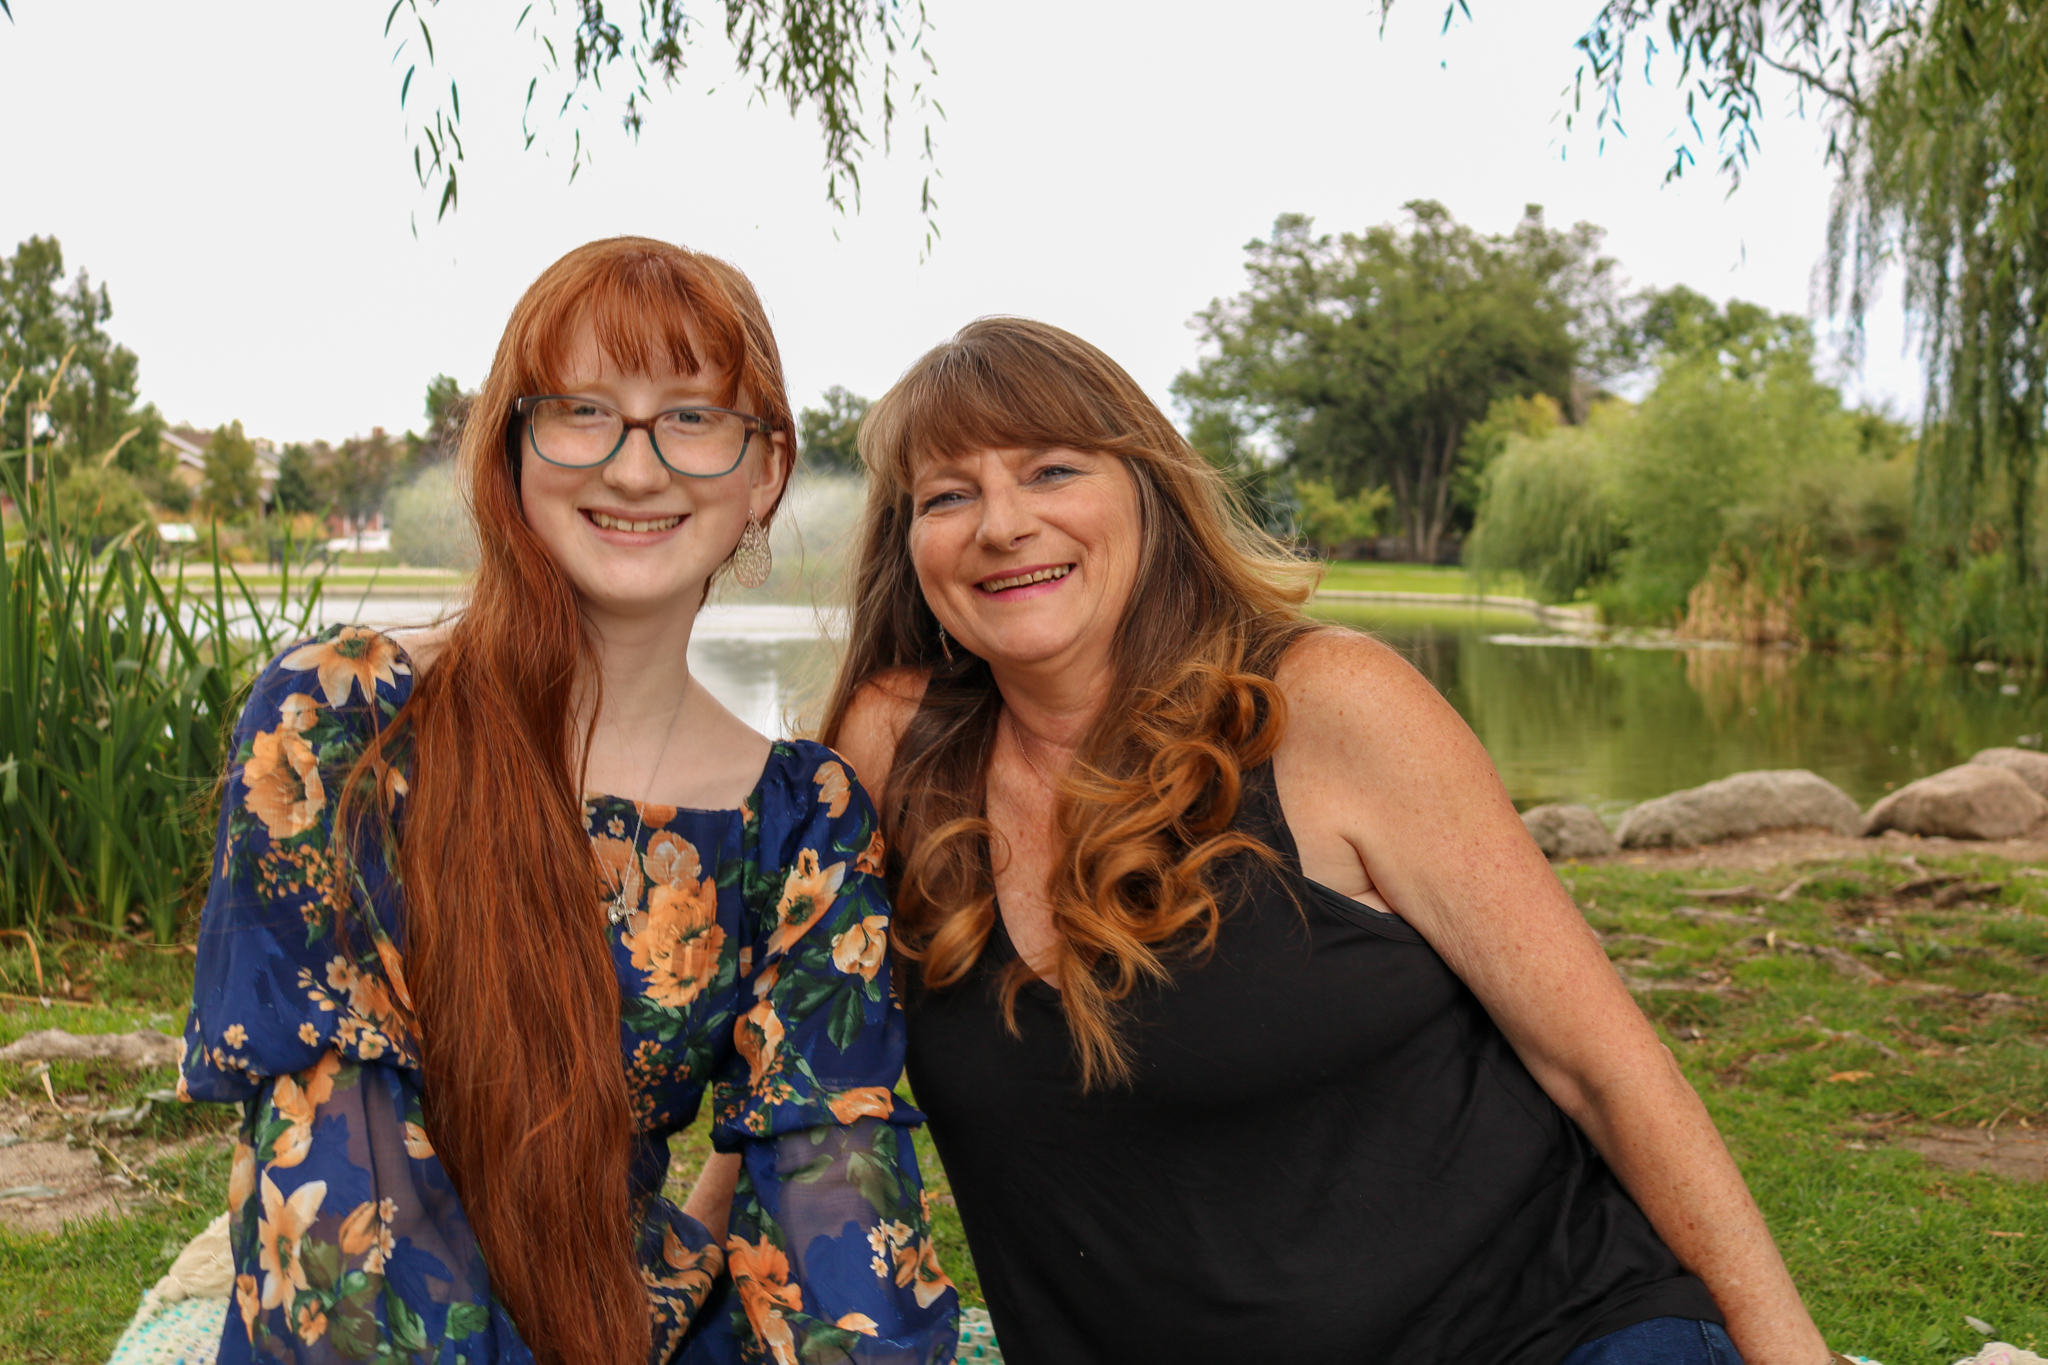 Glenda and her daughter by a lake